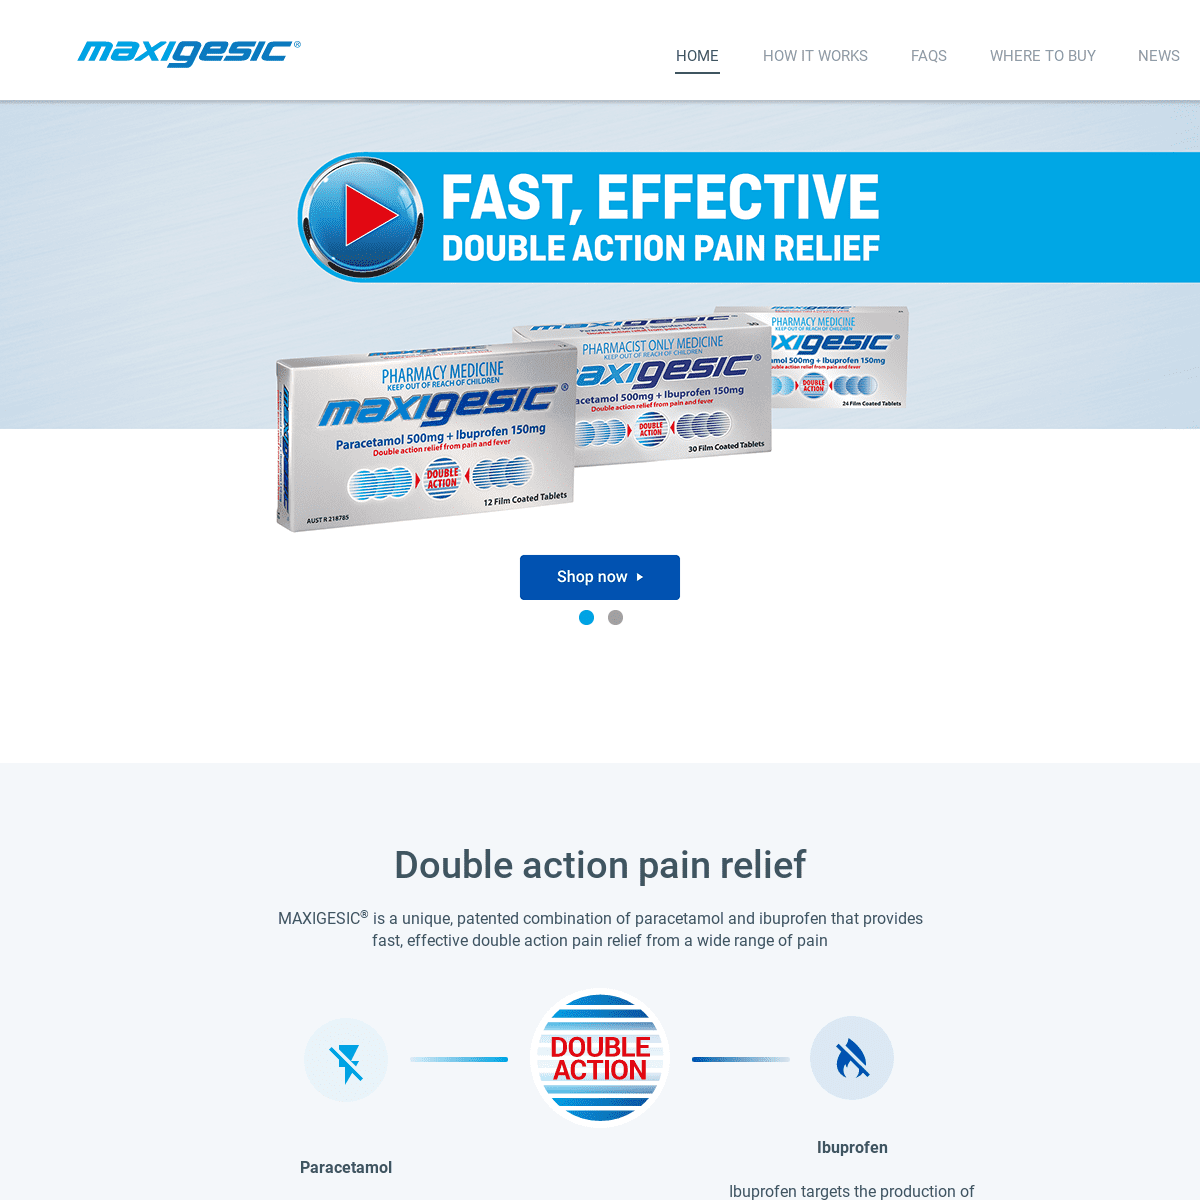 Fast and effective relief from a wide range of pain | Maxigesic Australia